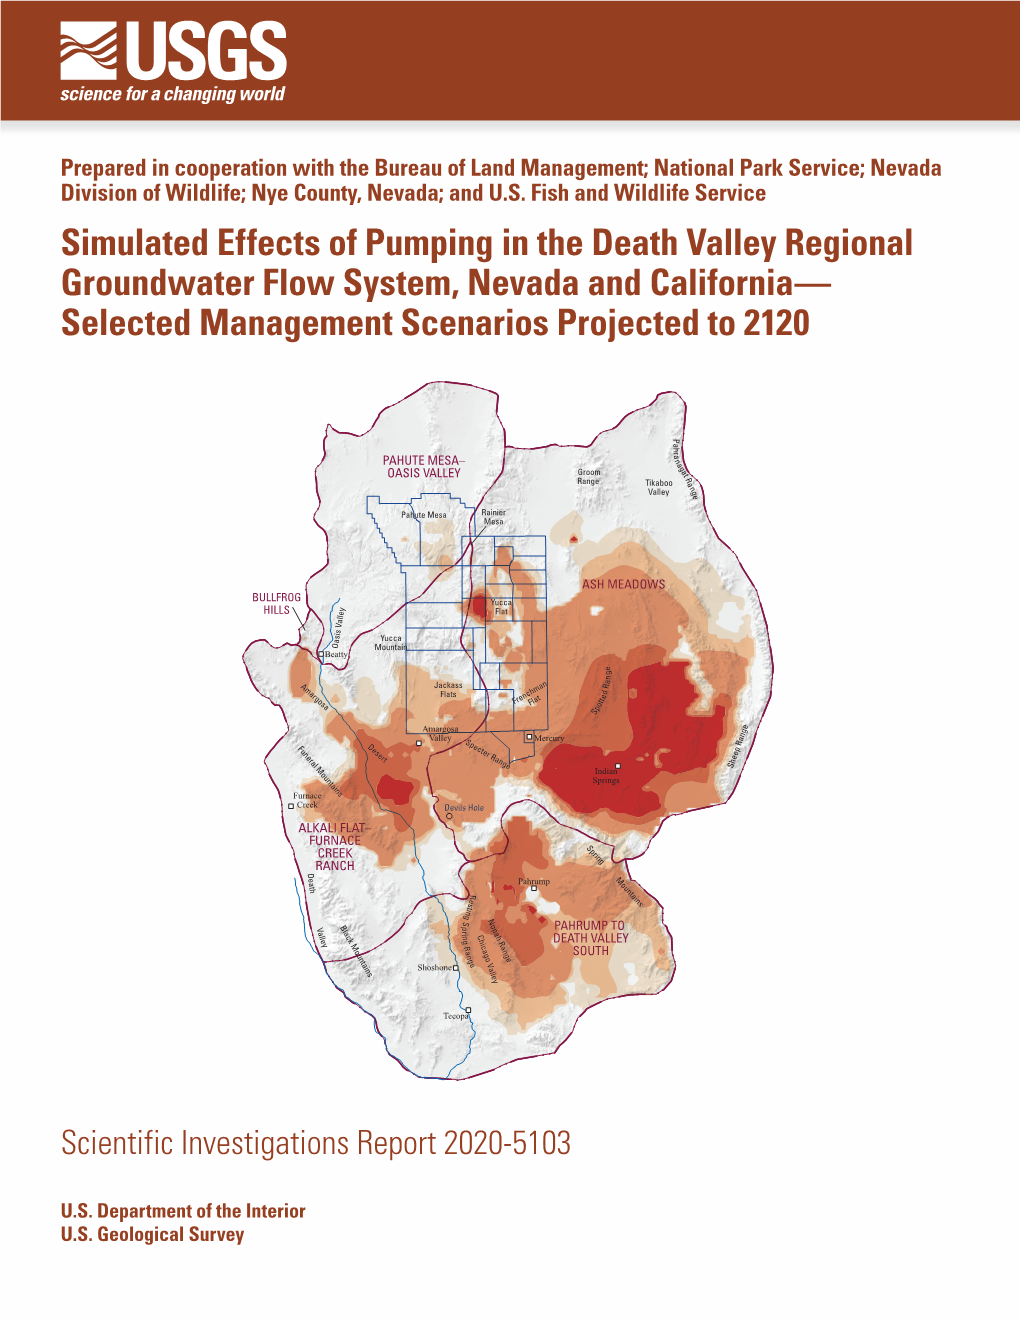 SIR 2020–5103: Simulated Effects of Pumping in the Death Valley